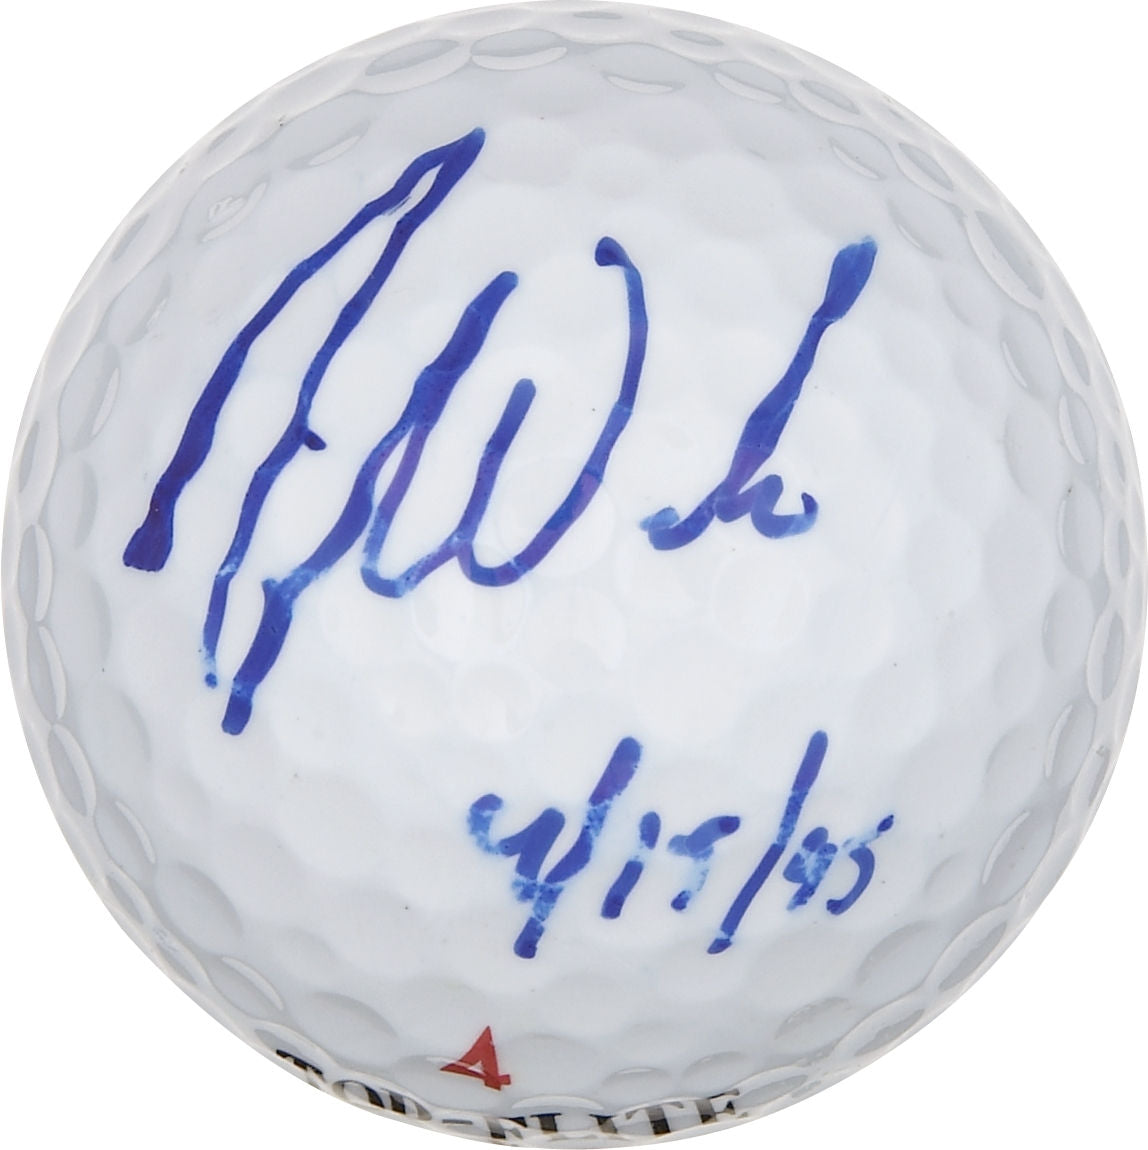 Your Tiger Woods Autographed Golf Ball Is Almost Definitely Fake